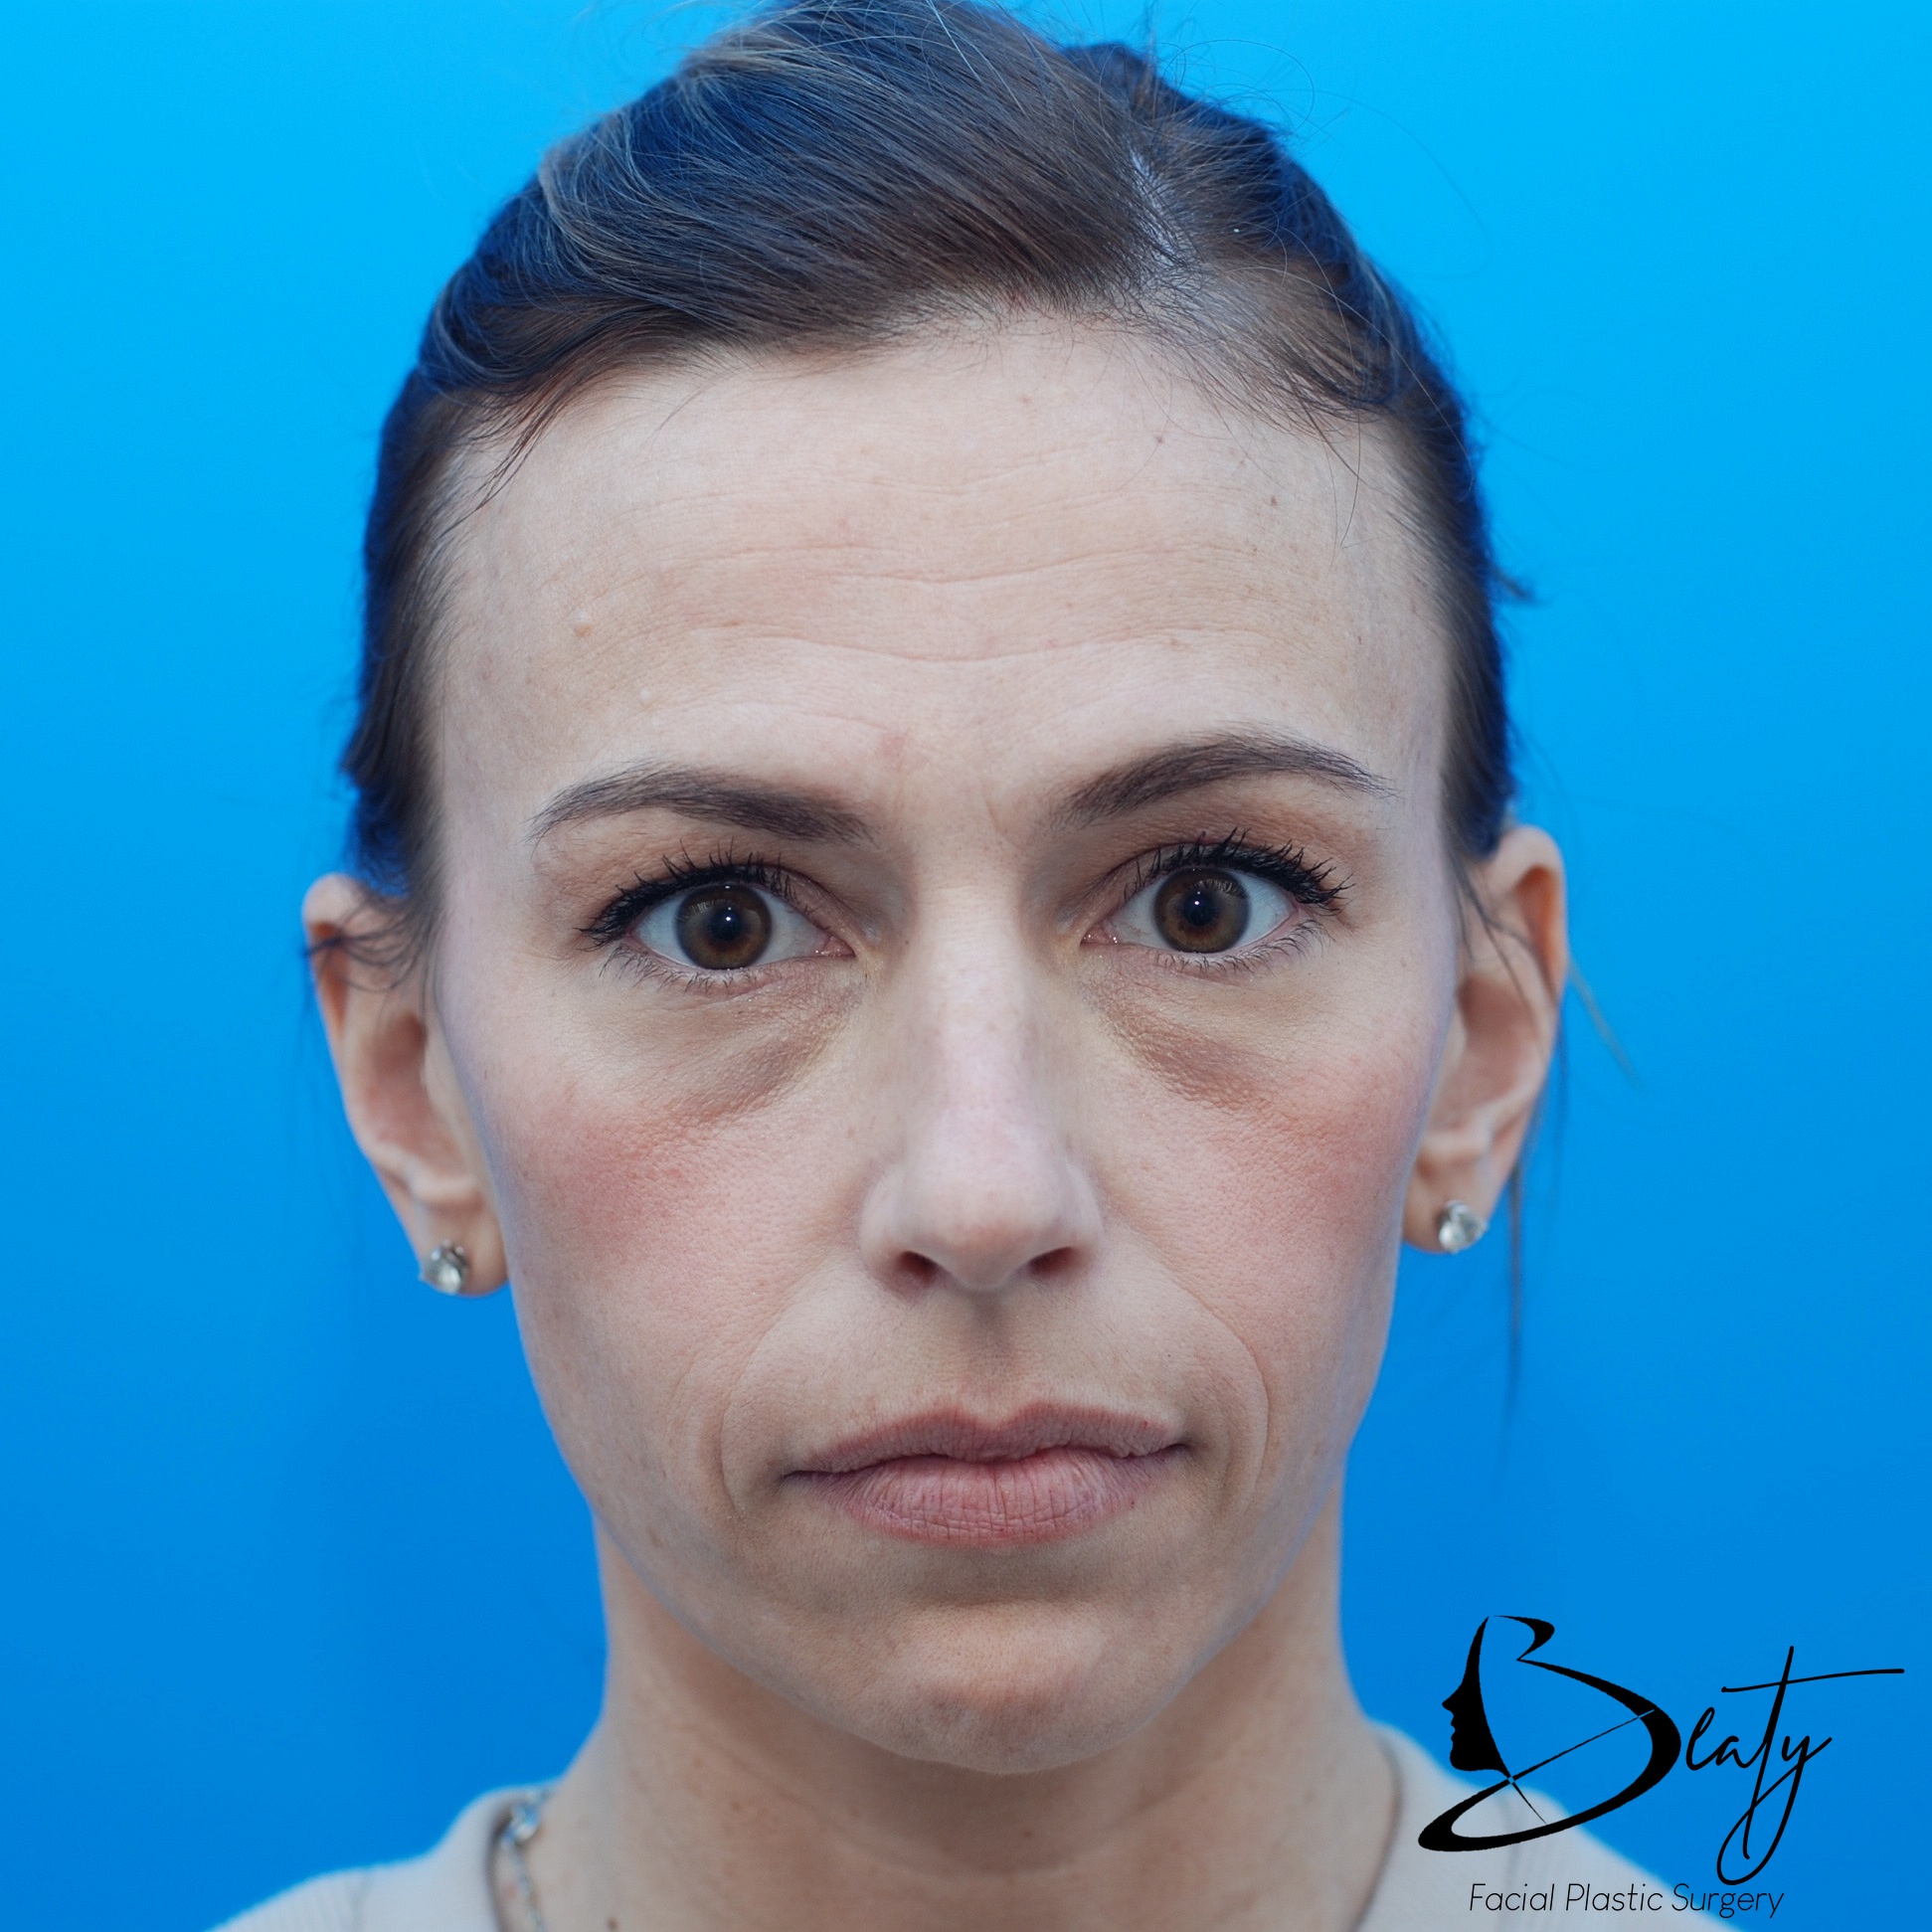 Upper blepharoplasty and brow lift